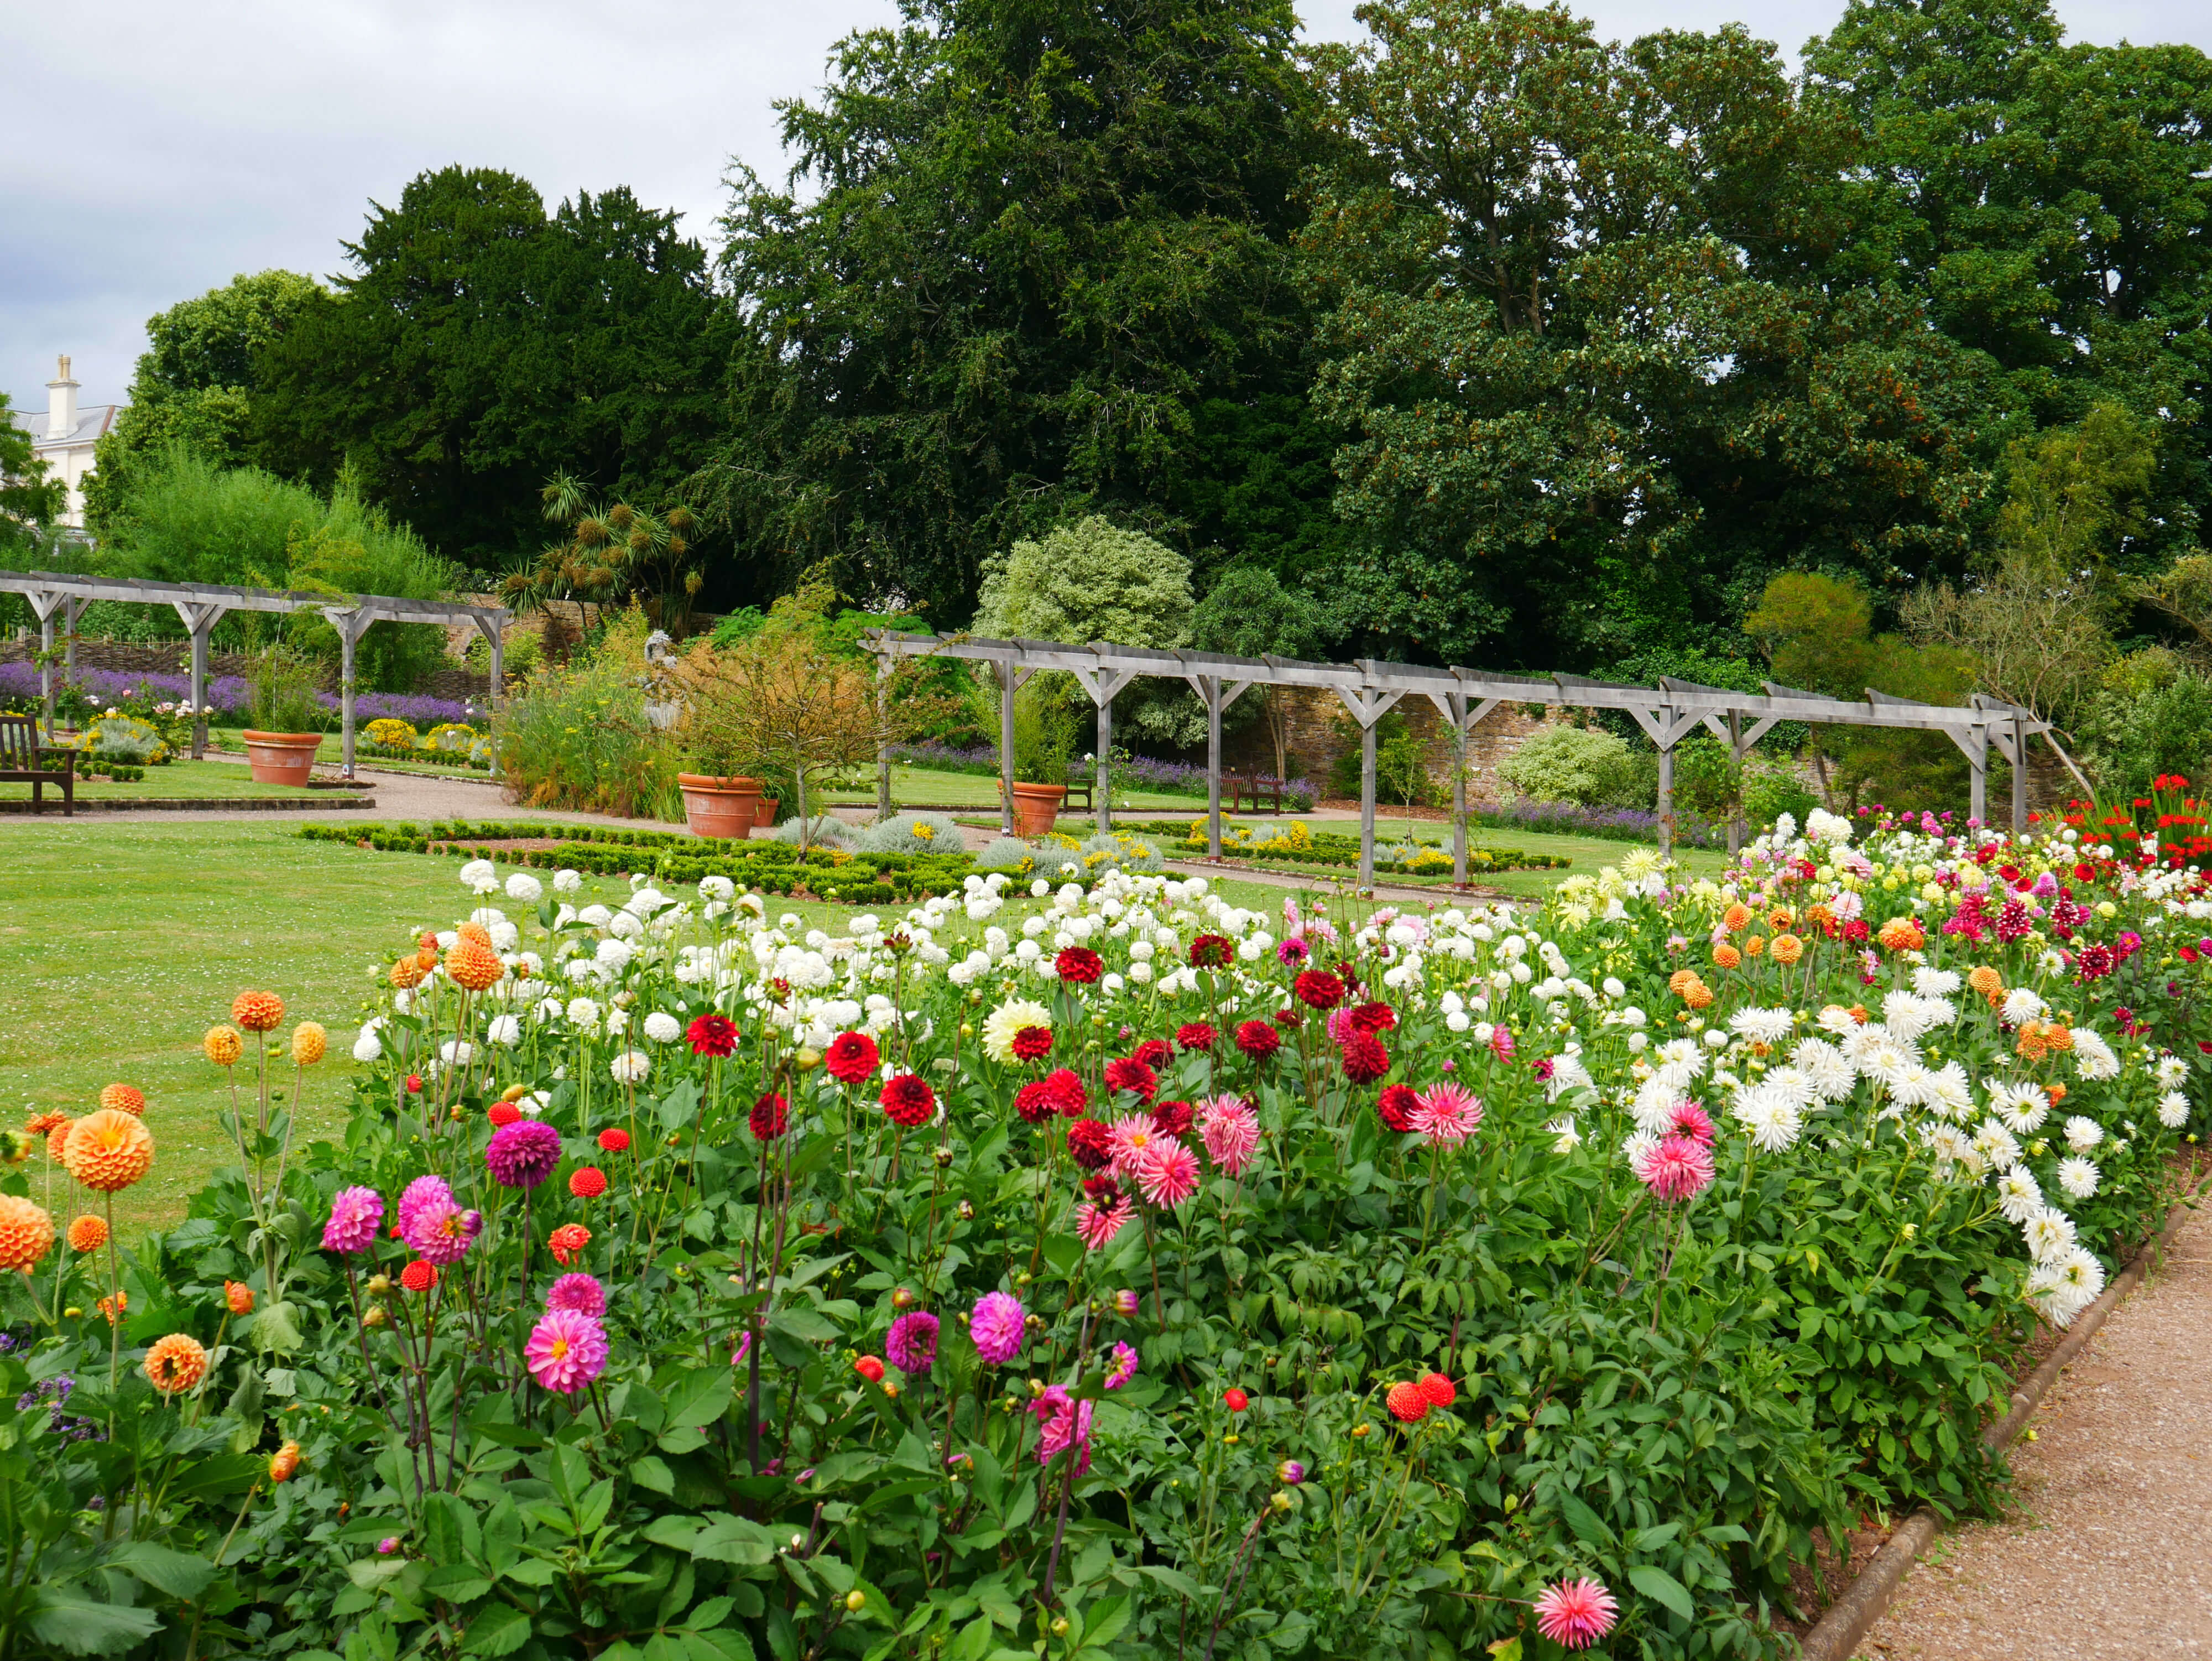 Short breaks in Torquay - the walled garden in Torre Abbey, an all year round attraction.